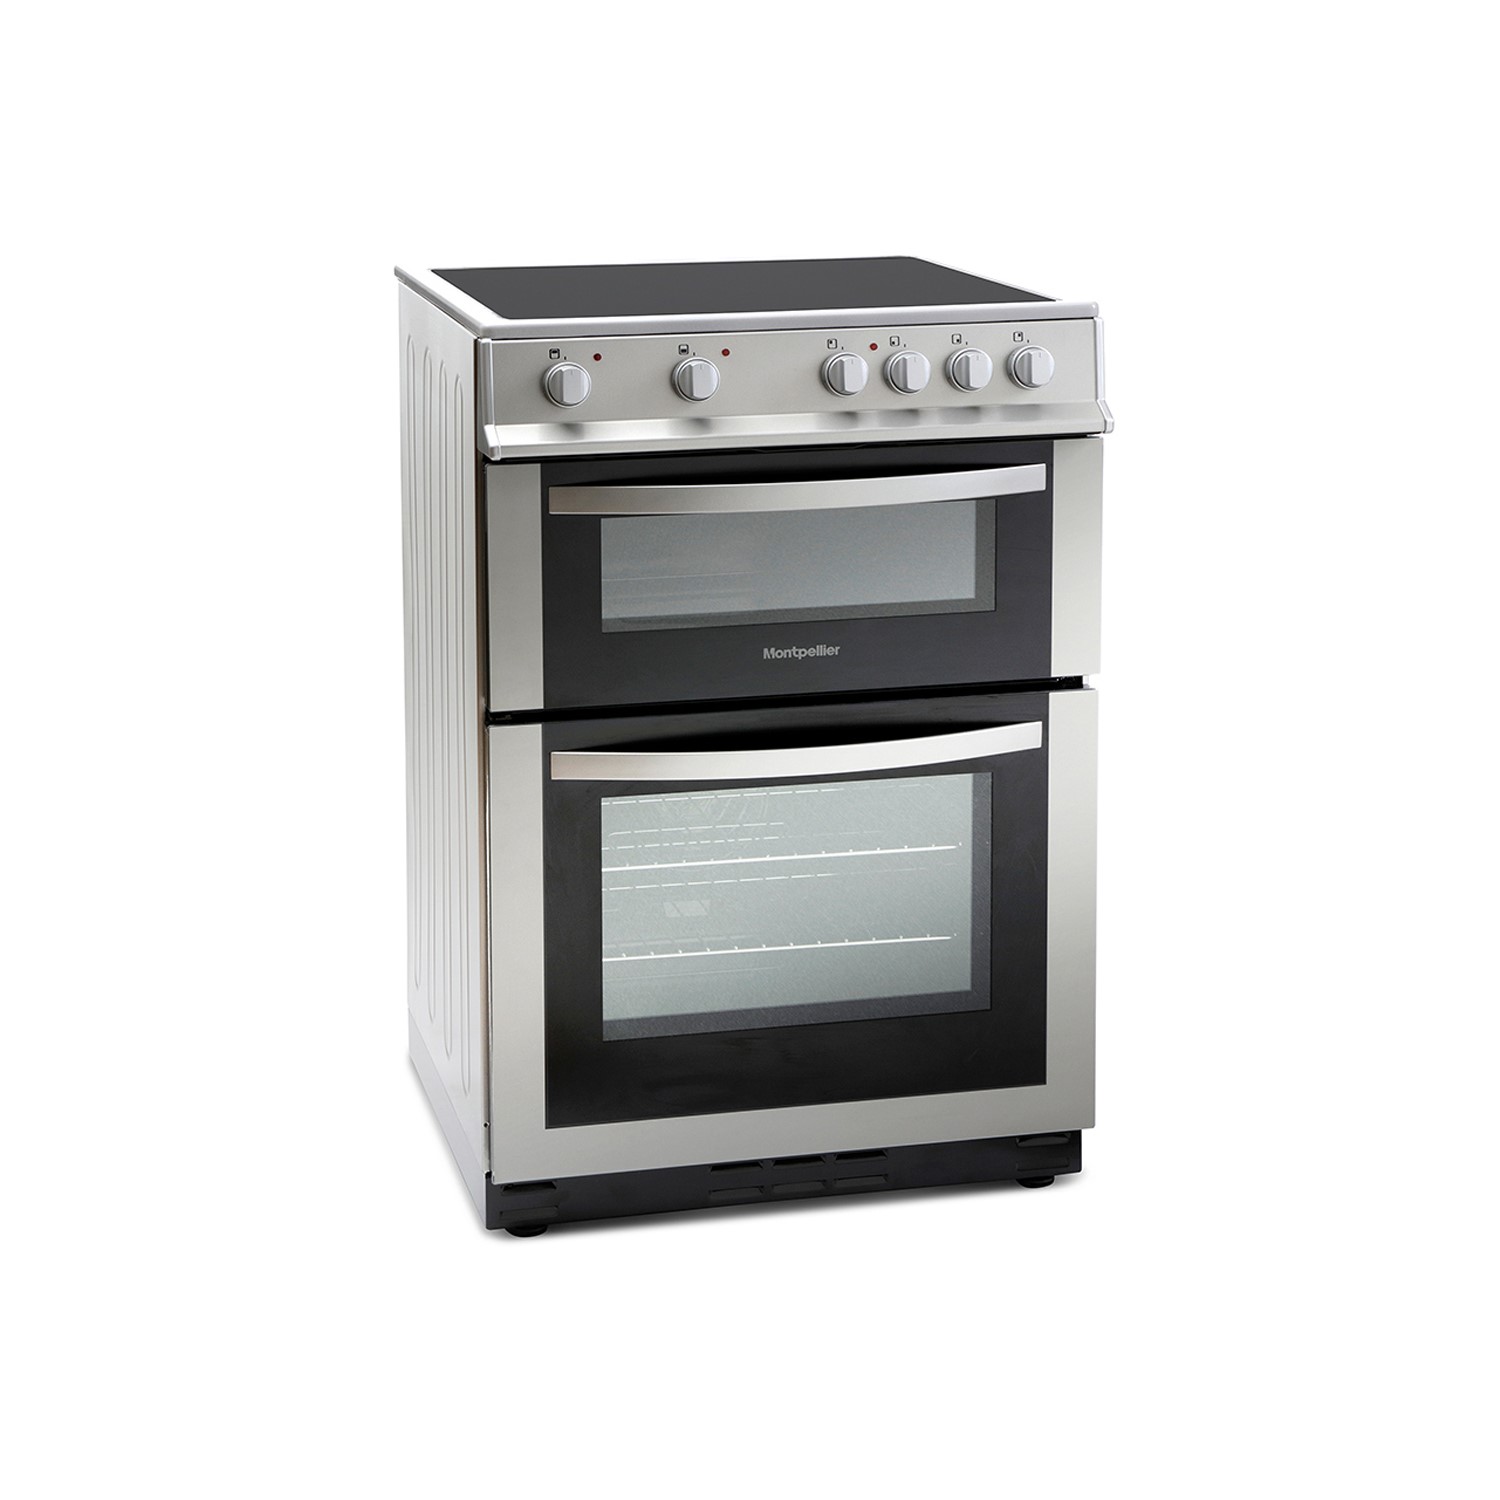 Refurbished Montpellier MDC600FS 60cm 4 Zone Electric Cooker